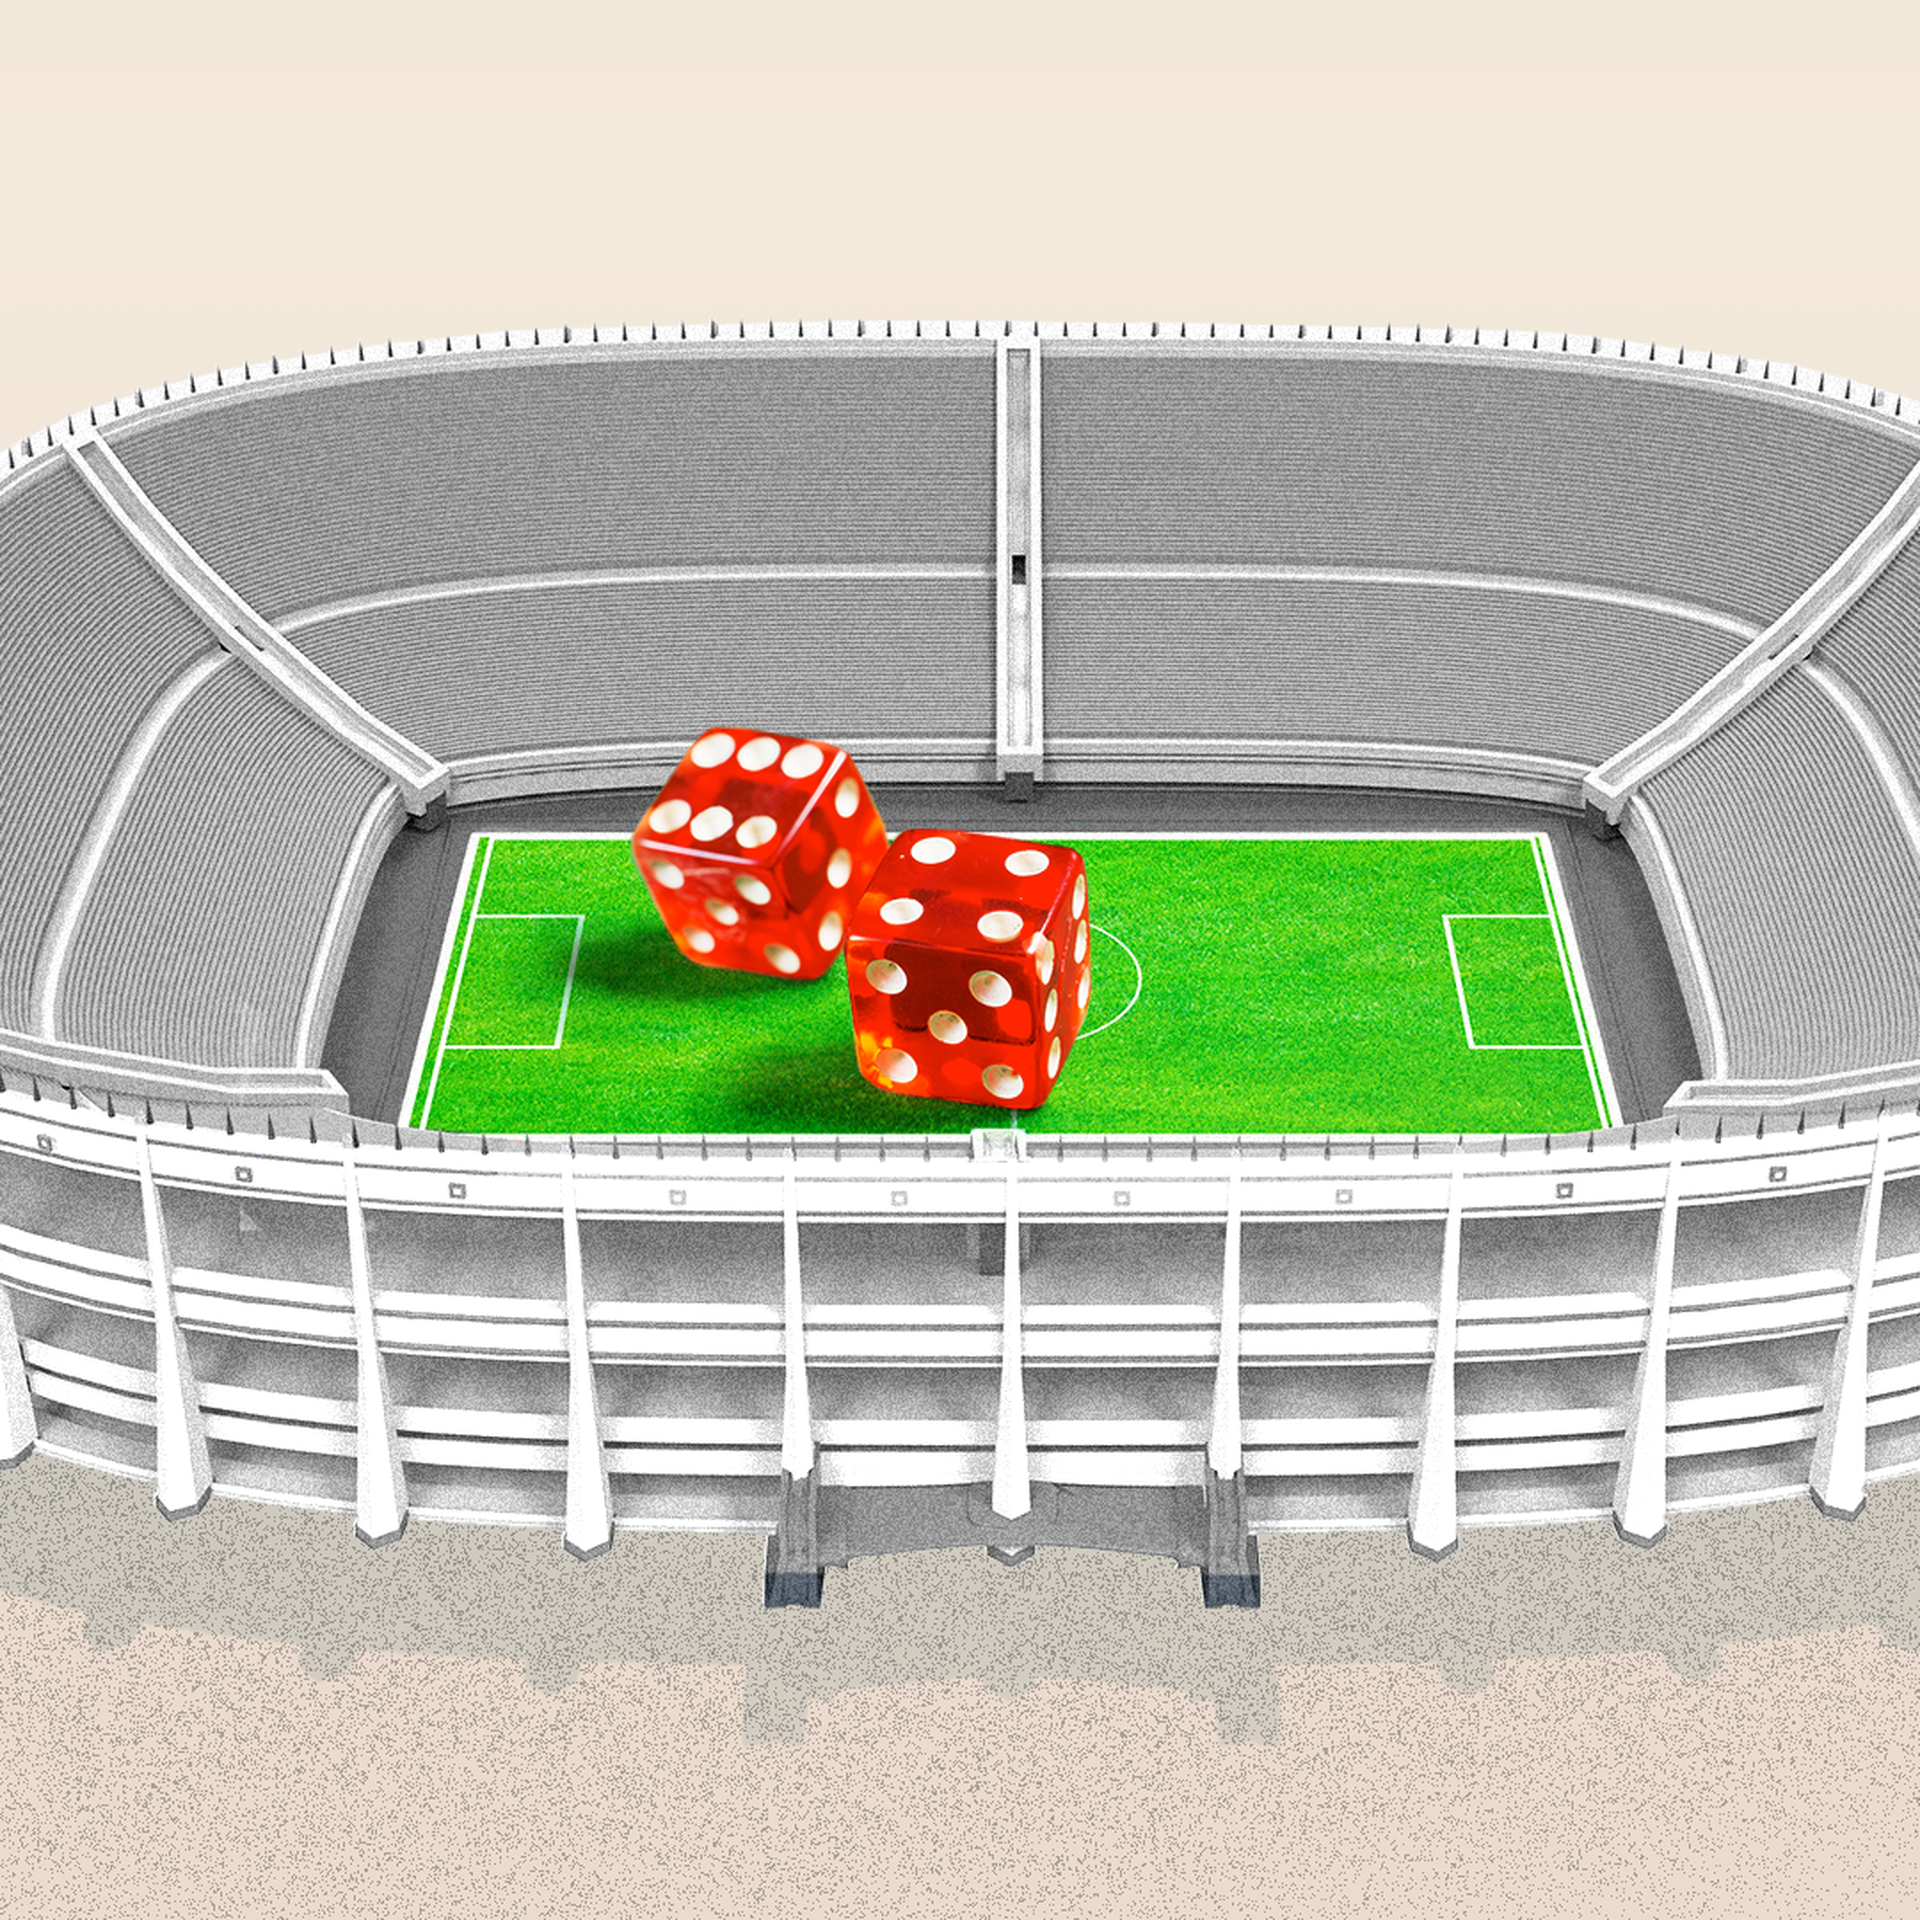 A graphic of a stadium with large dice rolling through the middle. 